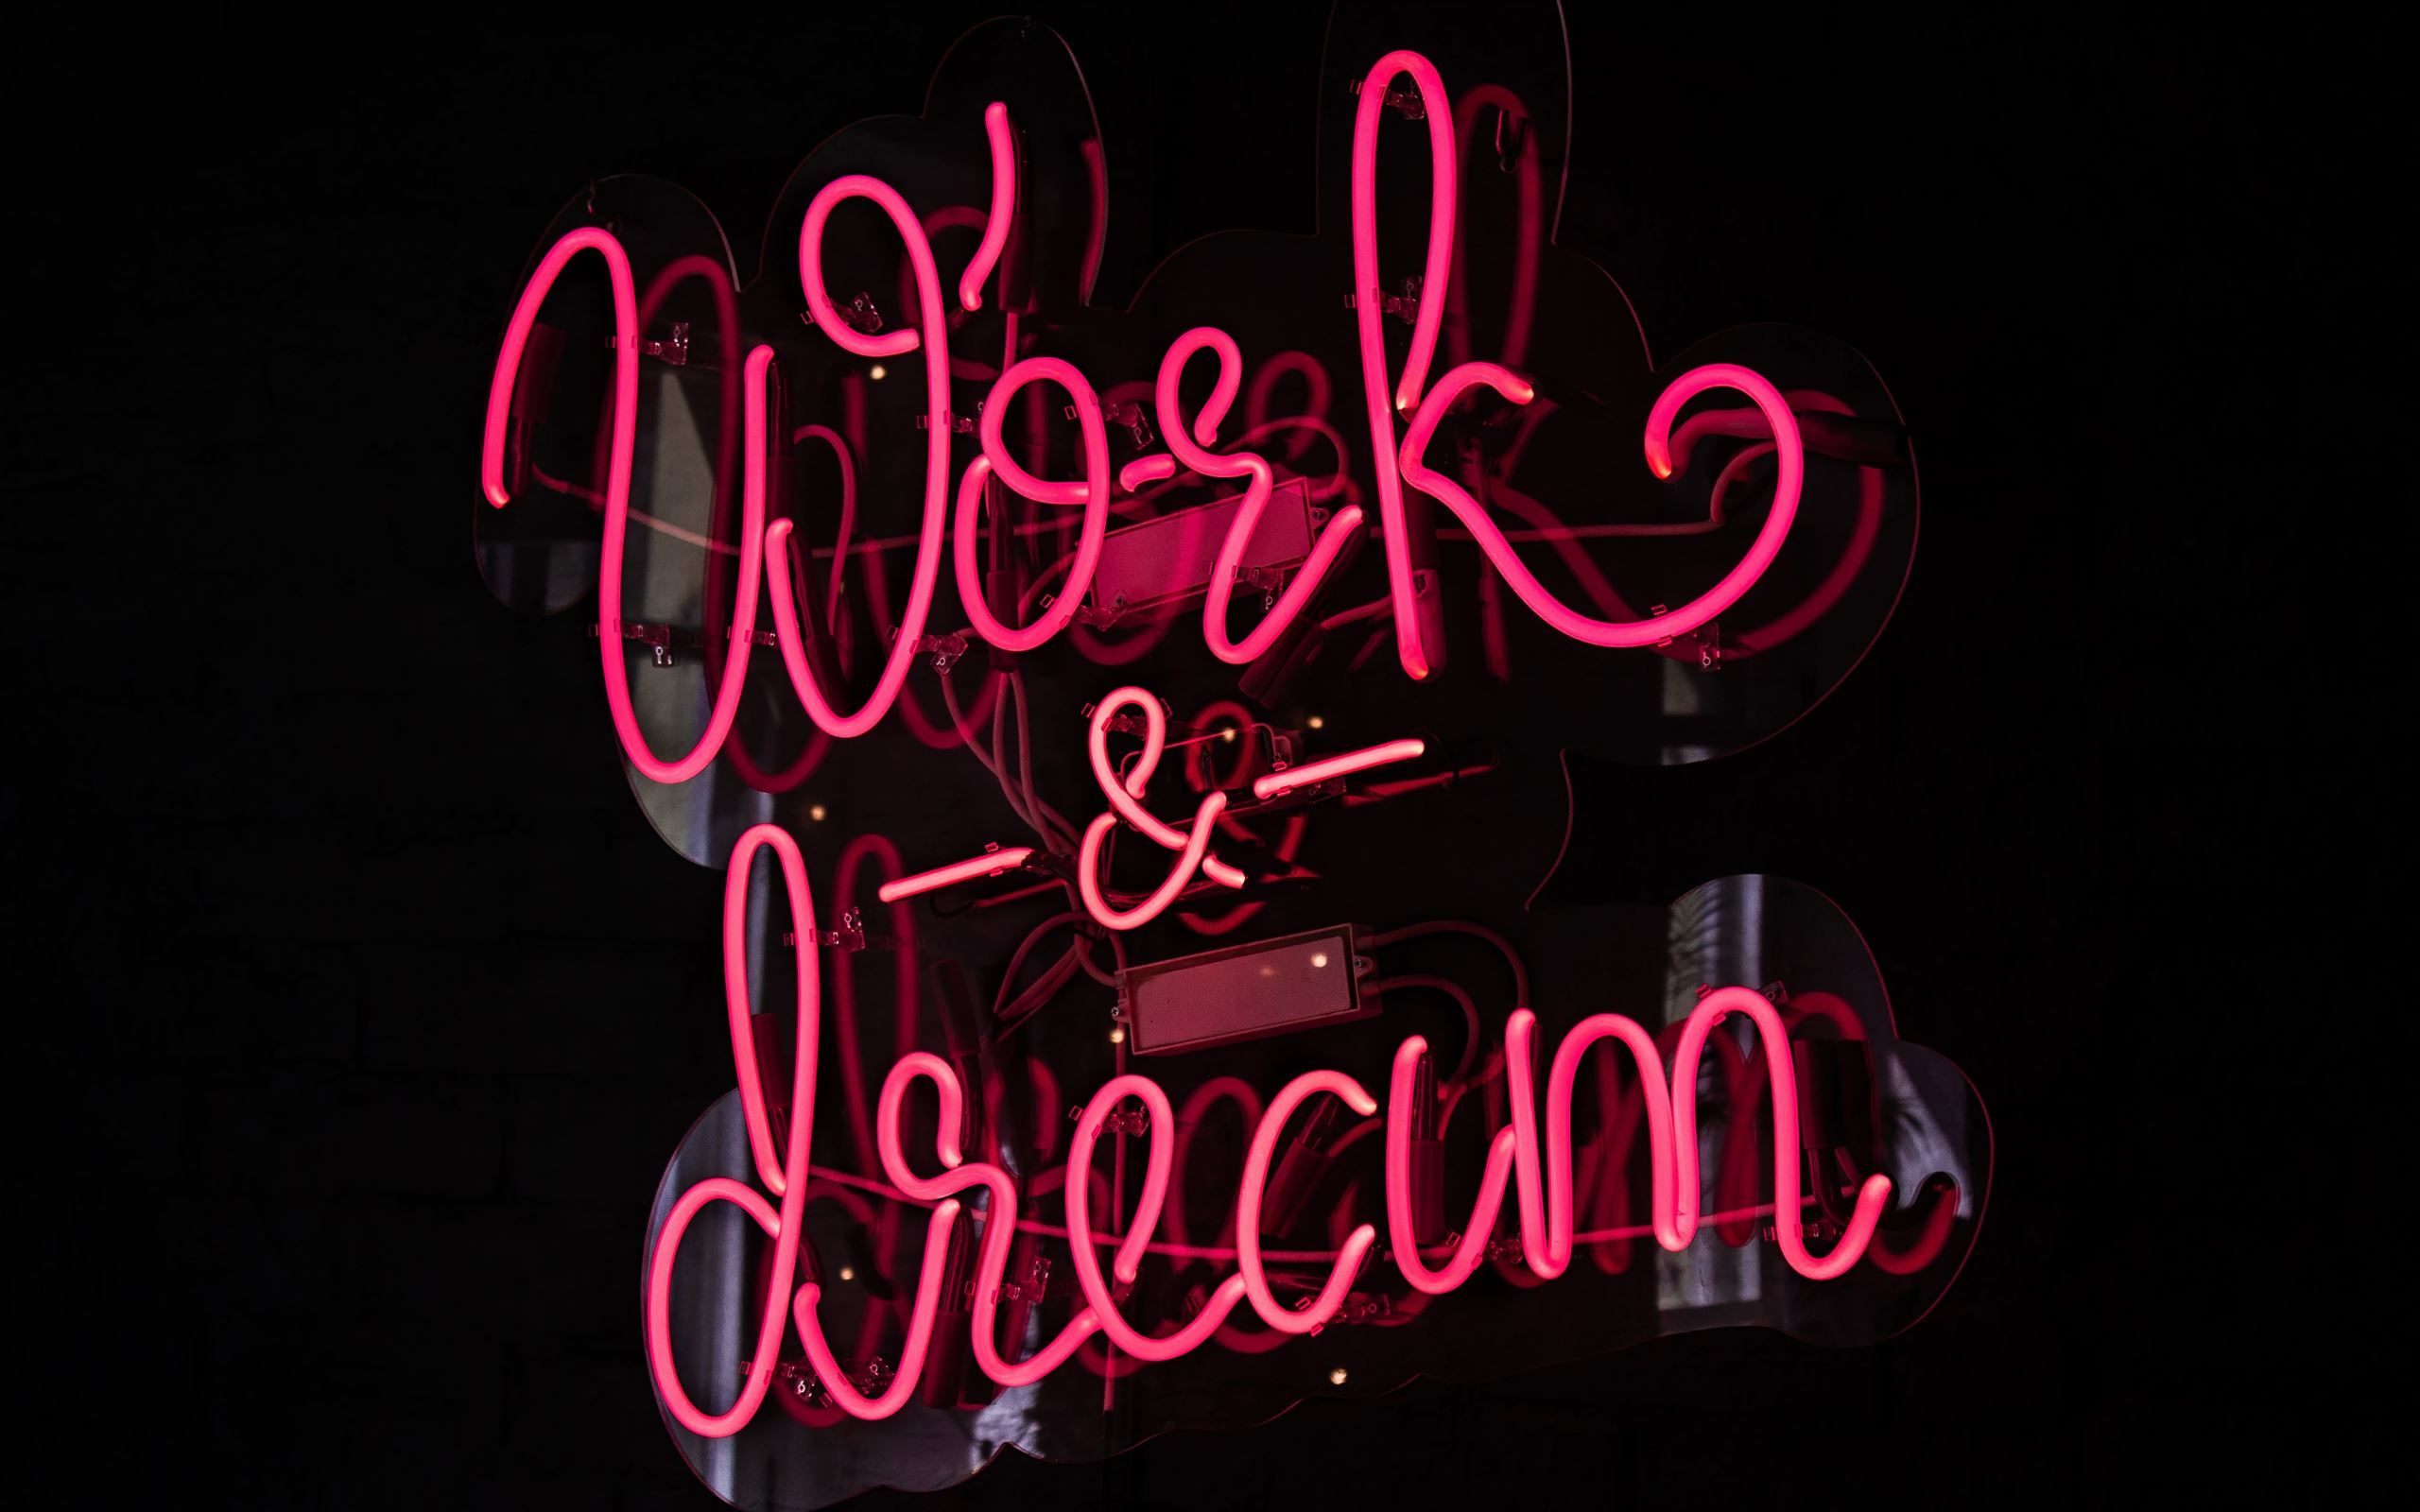 Works and Dream LED signage MacBook Air Wallpaper Download